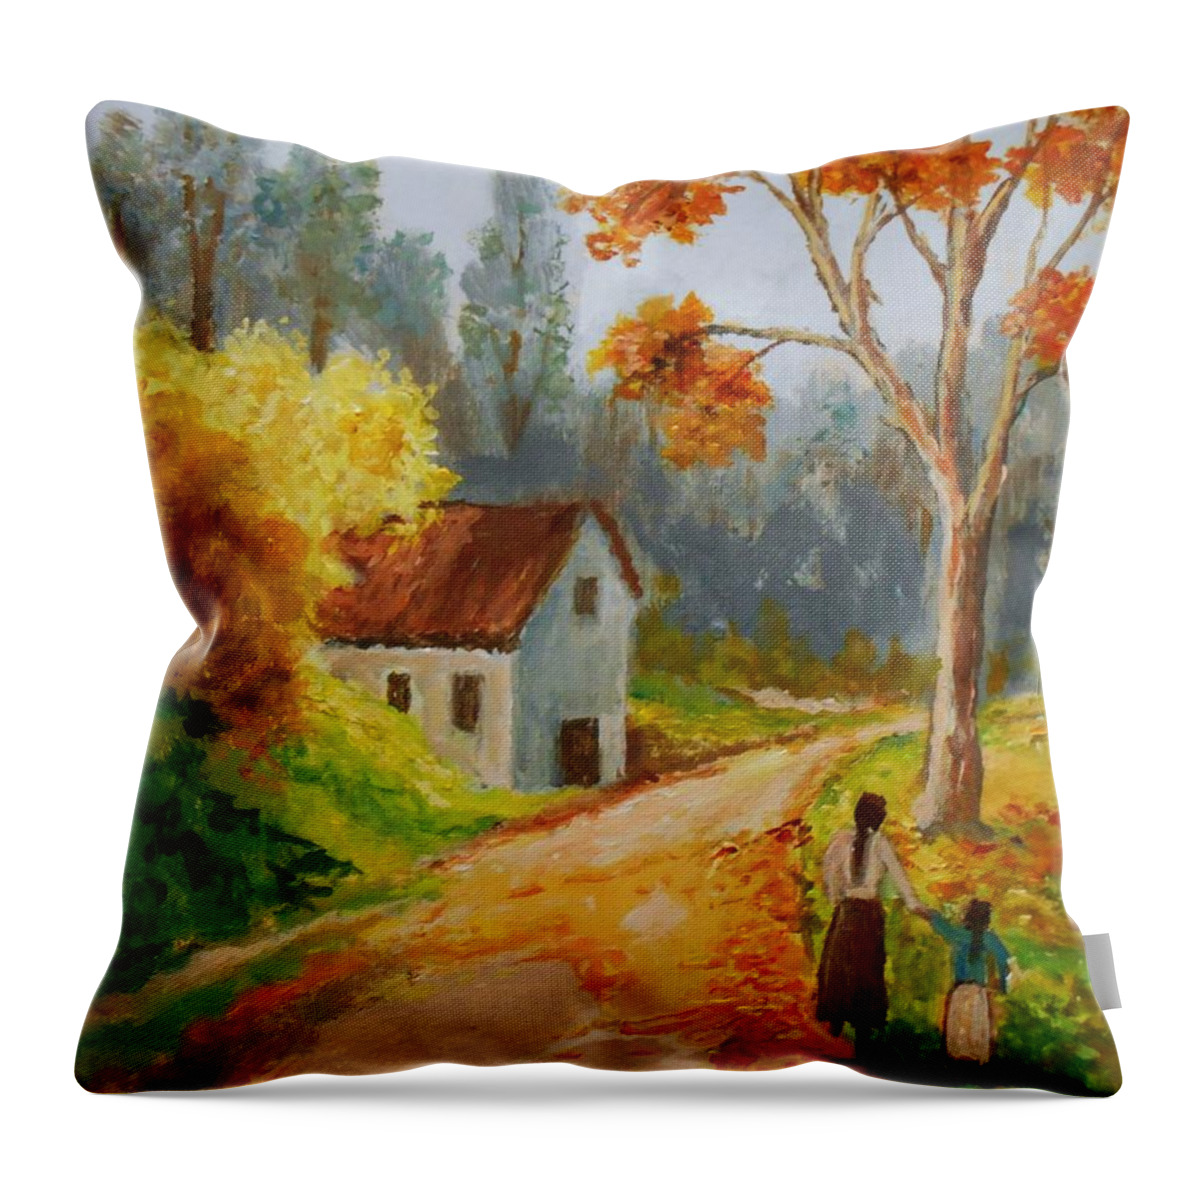 Autumn Throw Pillow featuring the painting Walk In Autumnal Forrest by Konstantinos Charalampopoulos